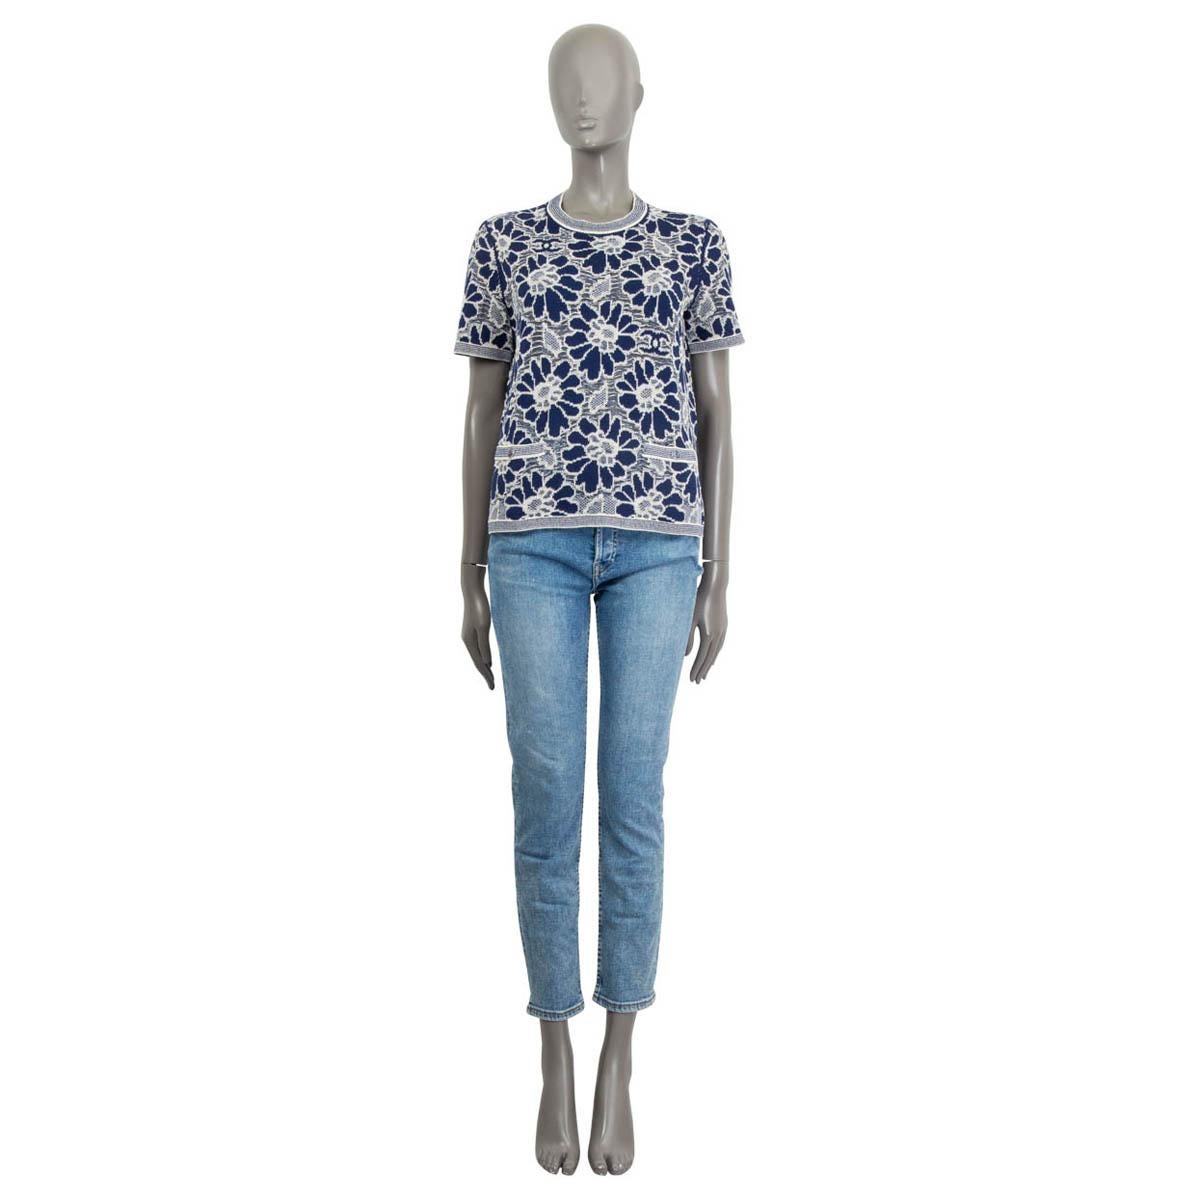 100% authentic Chanel Pre-Spring 2020 camellia knitted top in blue and off-white wool (51%), cotton (33%) and polyamide (16%). Features short sleeves and two sewn shut buttoned patch pockets on the front. Unlined. Has been worn once and is in